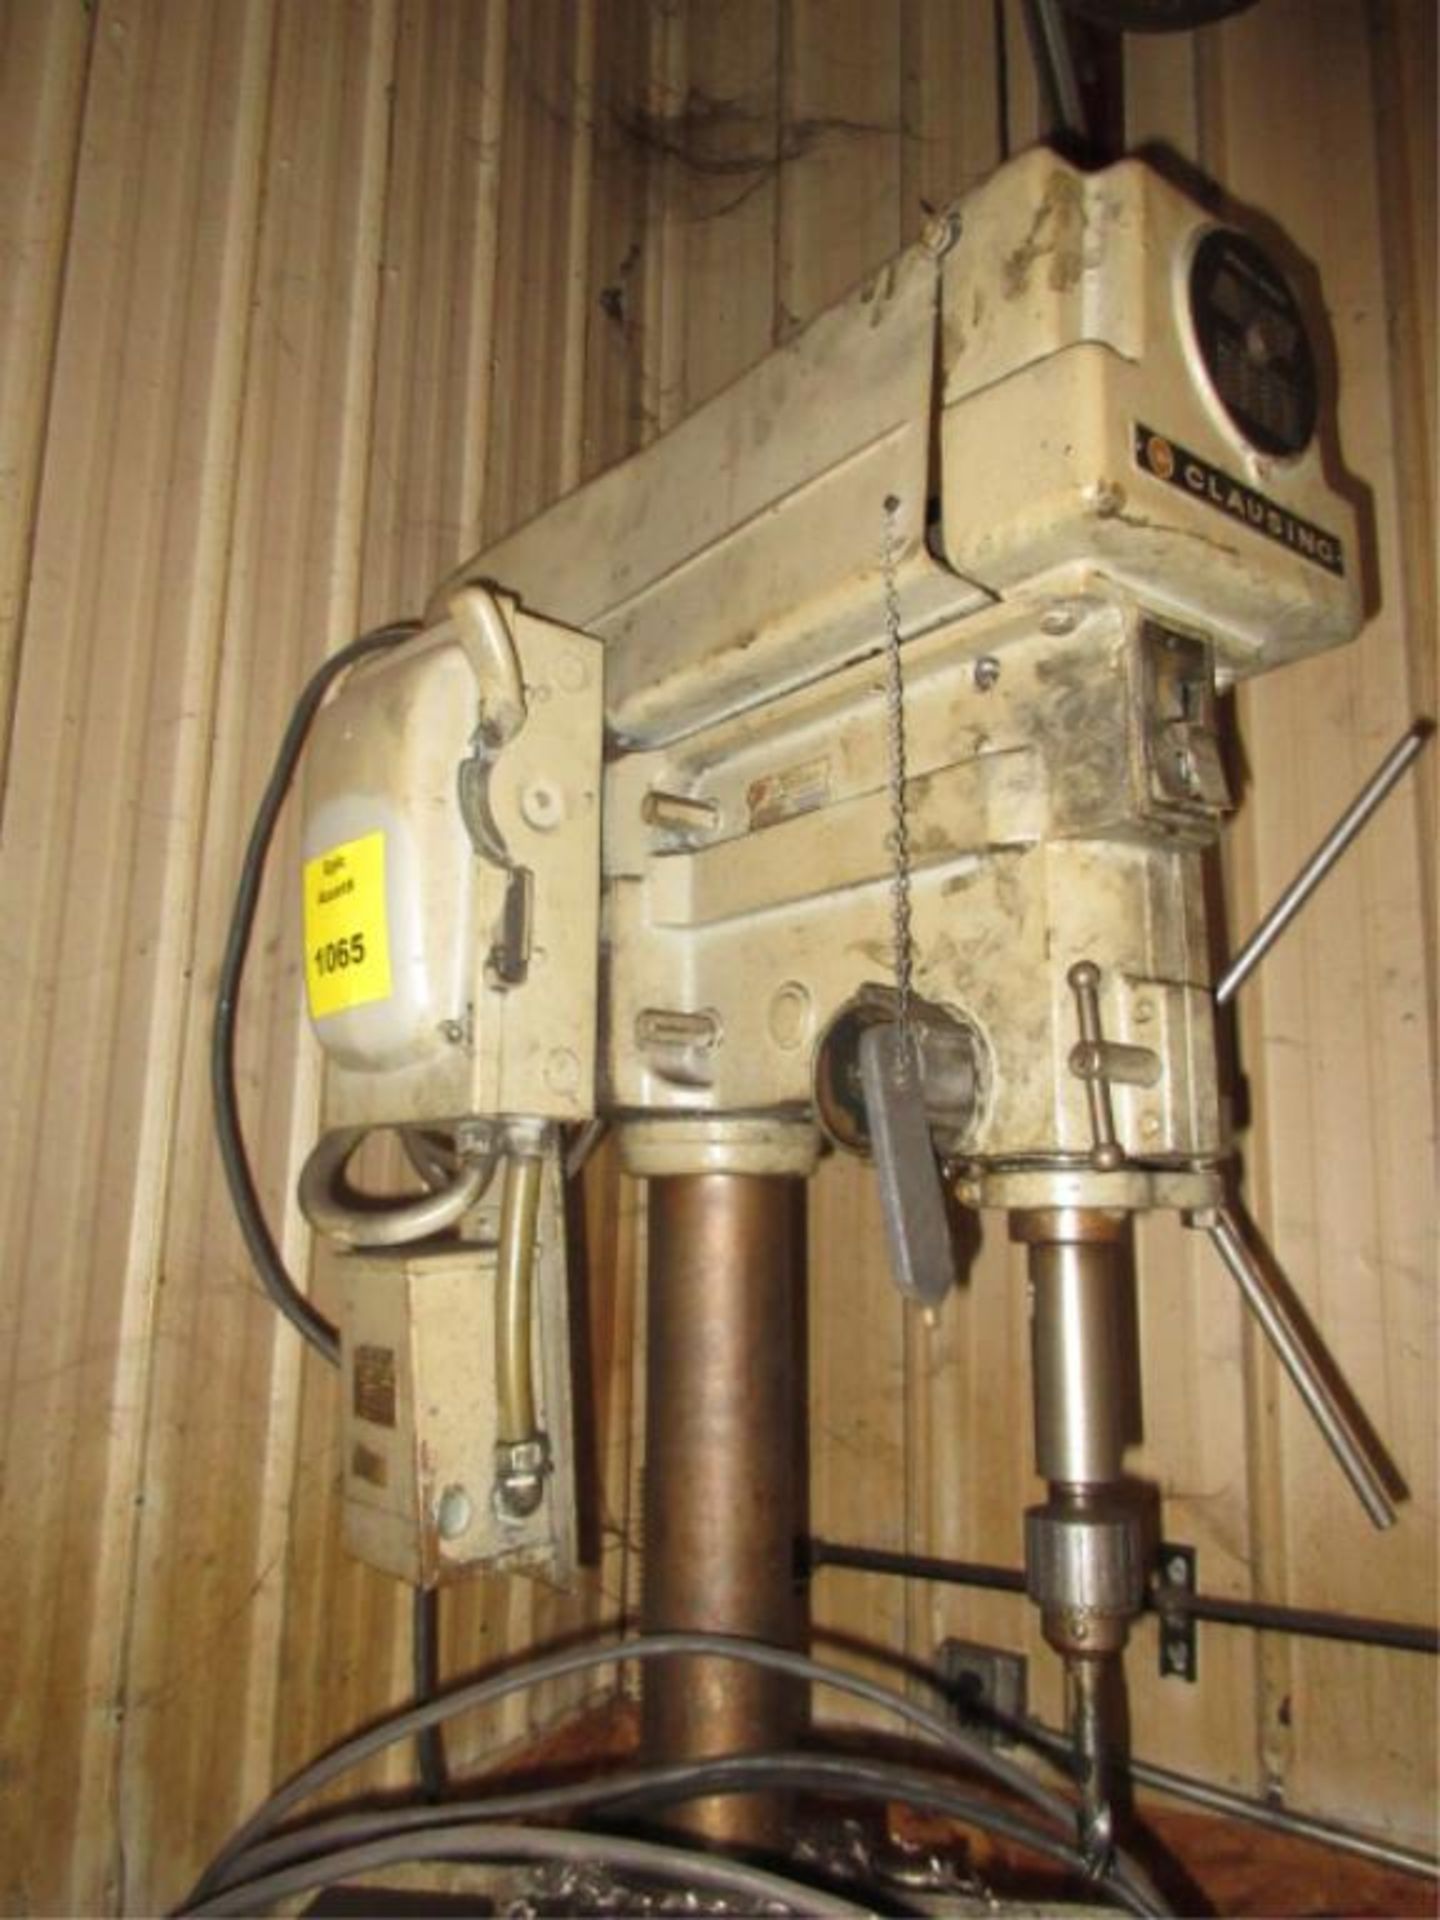 Clausing Drill Press. Clausing 2223 20" Variable Speed Drill Press, 1 hp, spindle speeds 150-2000 - Image 2 of 9